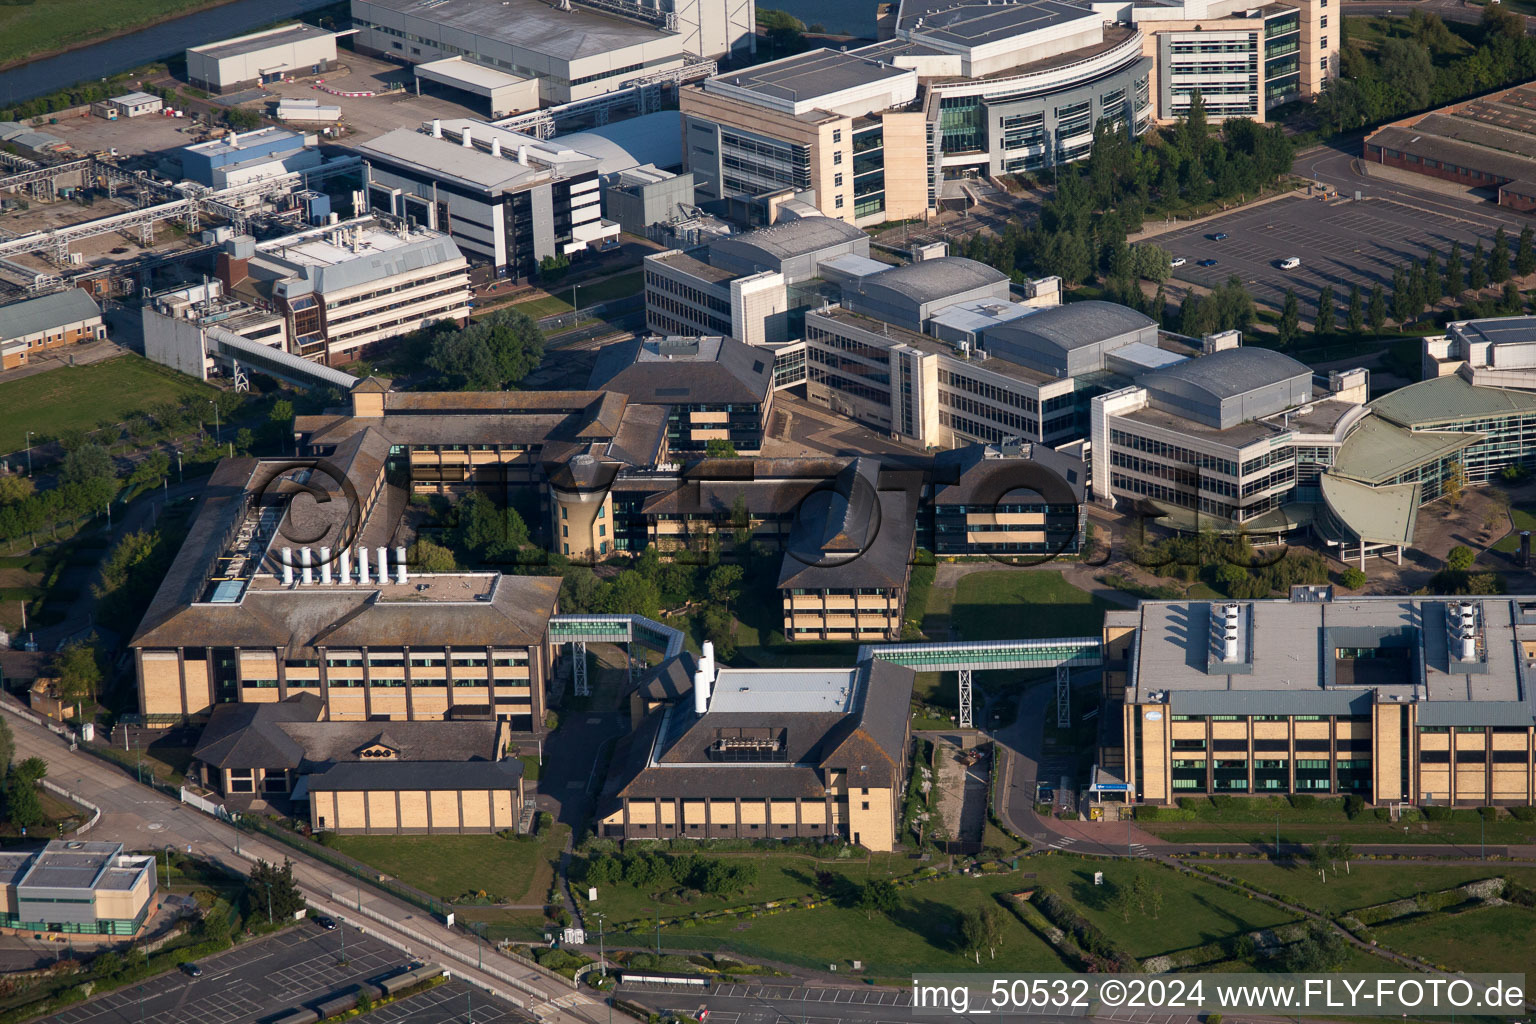 Building and production halls on the premises of the chemical manufacturers Pfizer Ltd and Discovery Park in Sandwich in England, United Kingdom seen from above